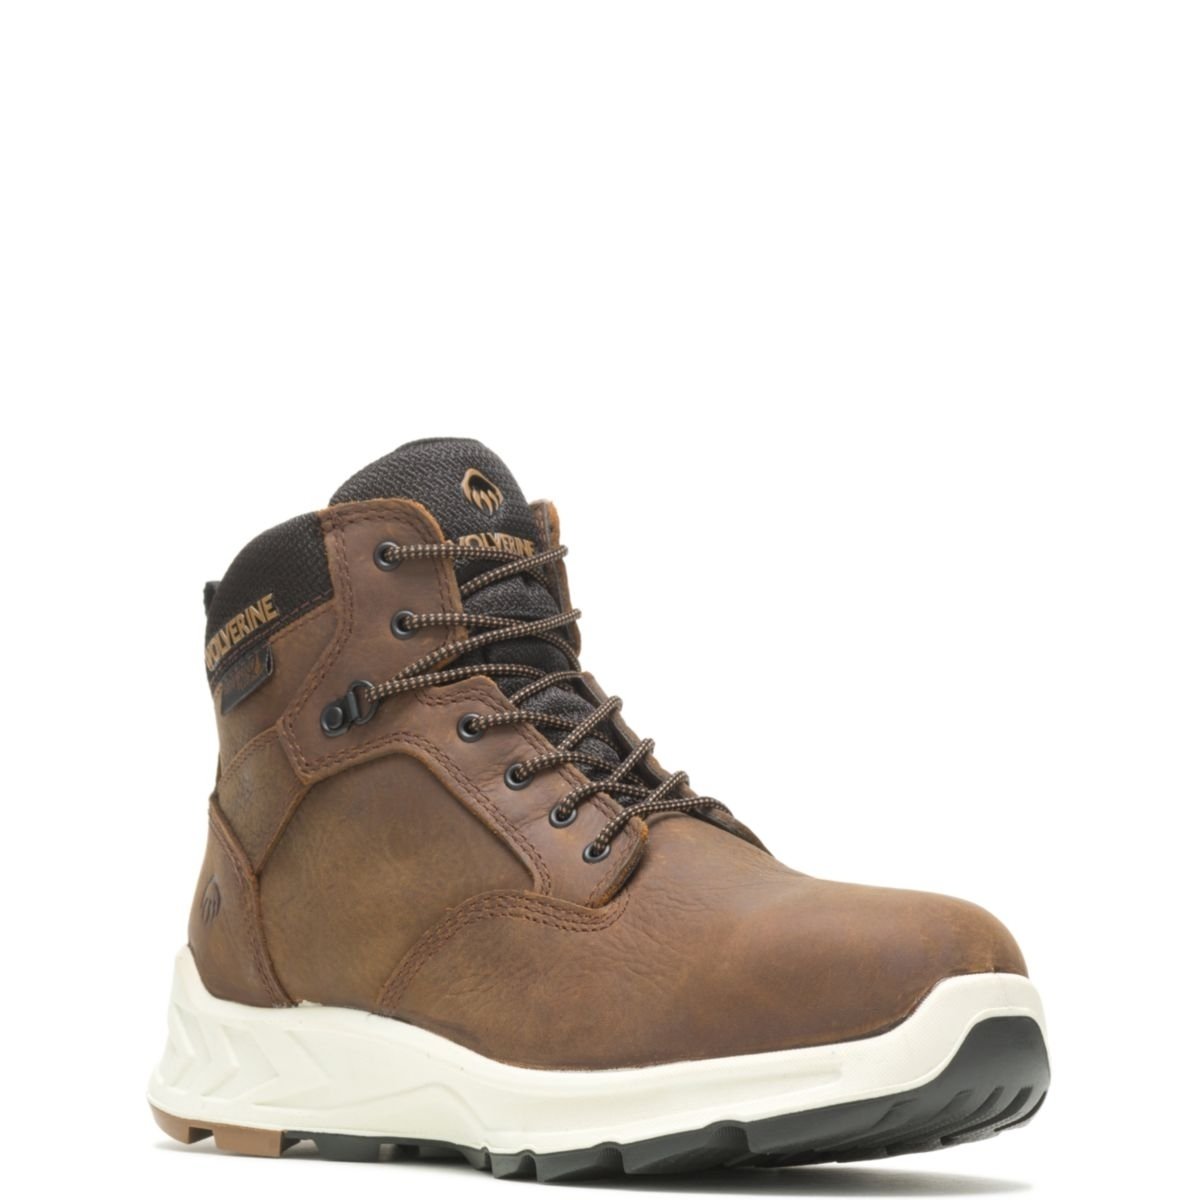 WOLVERINE Men's ShiftPlus Work LX 6 Alloy Toe Work Boot Brown - W201156 BROWN - BROWN, 10.5-M